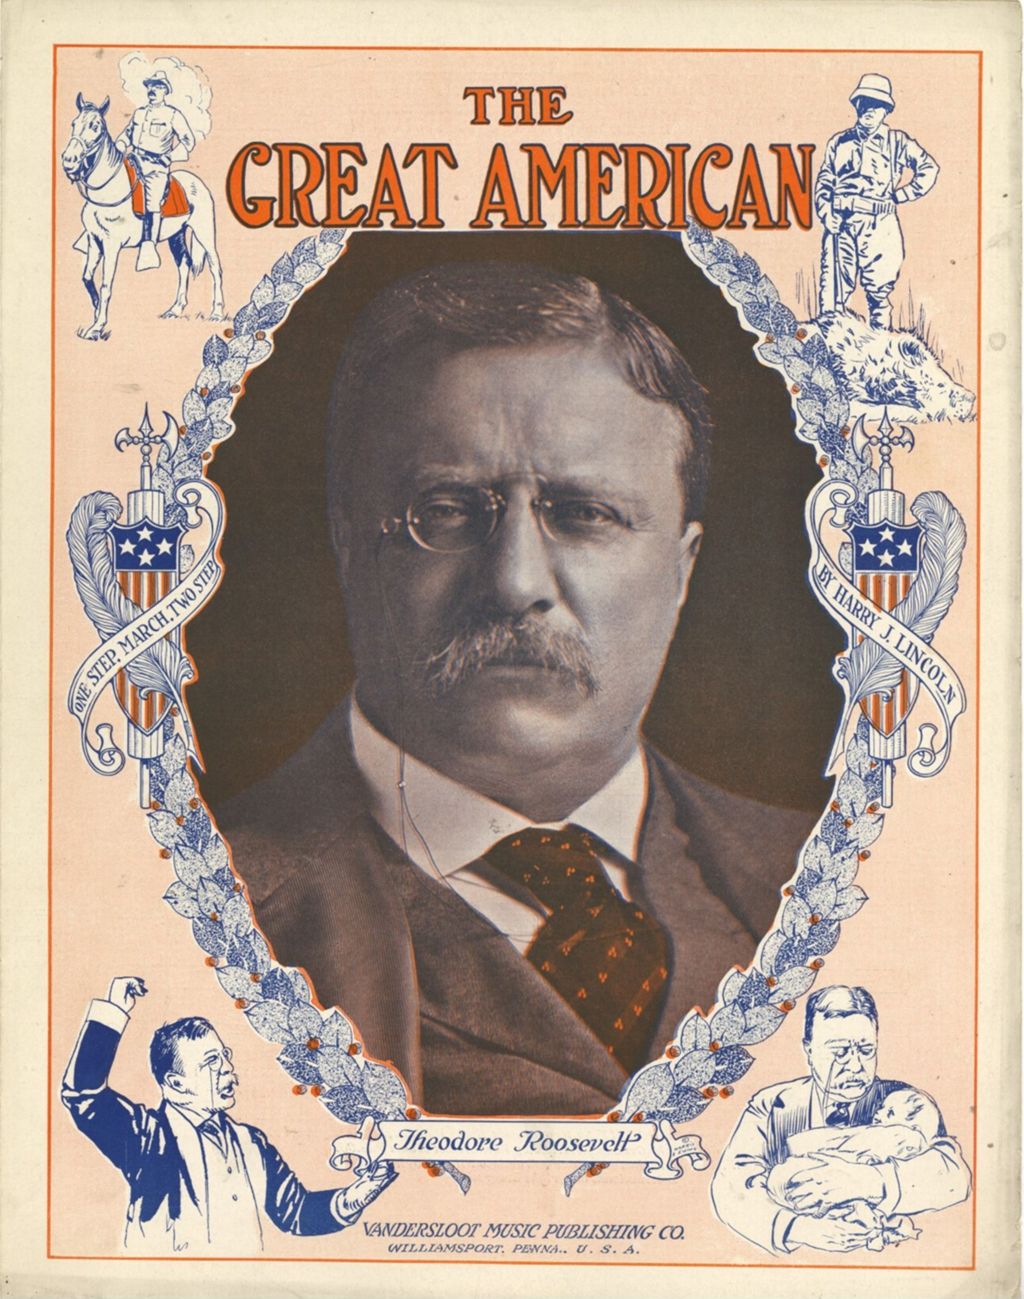 Miniature of Great American (Theodore Roosevelt)